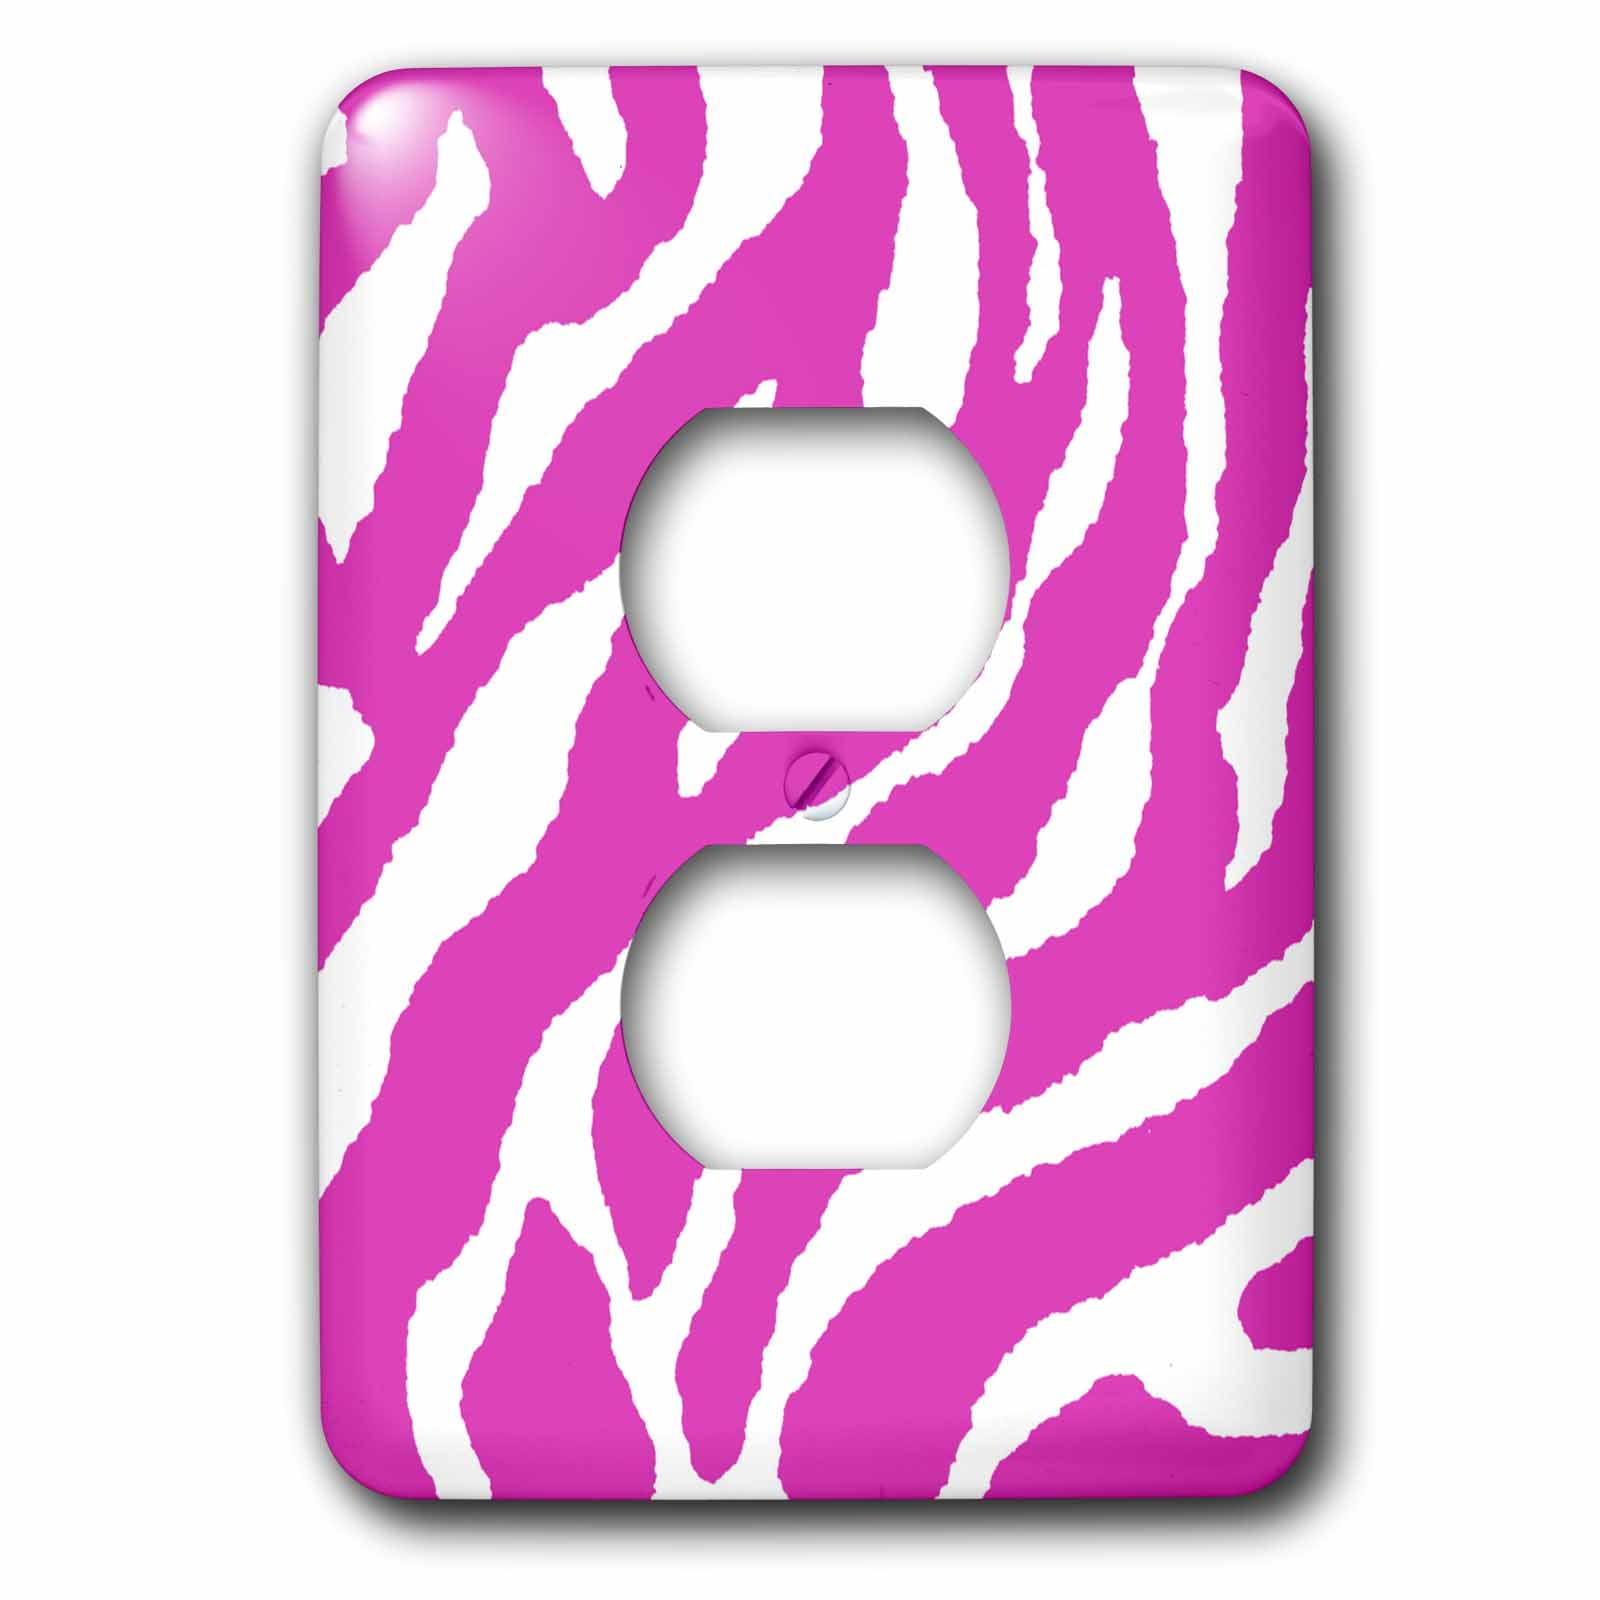 3dRose lsp_25468_6 Pink and Black Zebra Print 2 Outlet Cover 